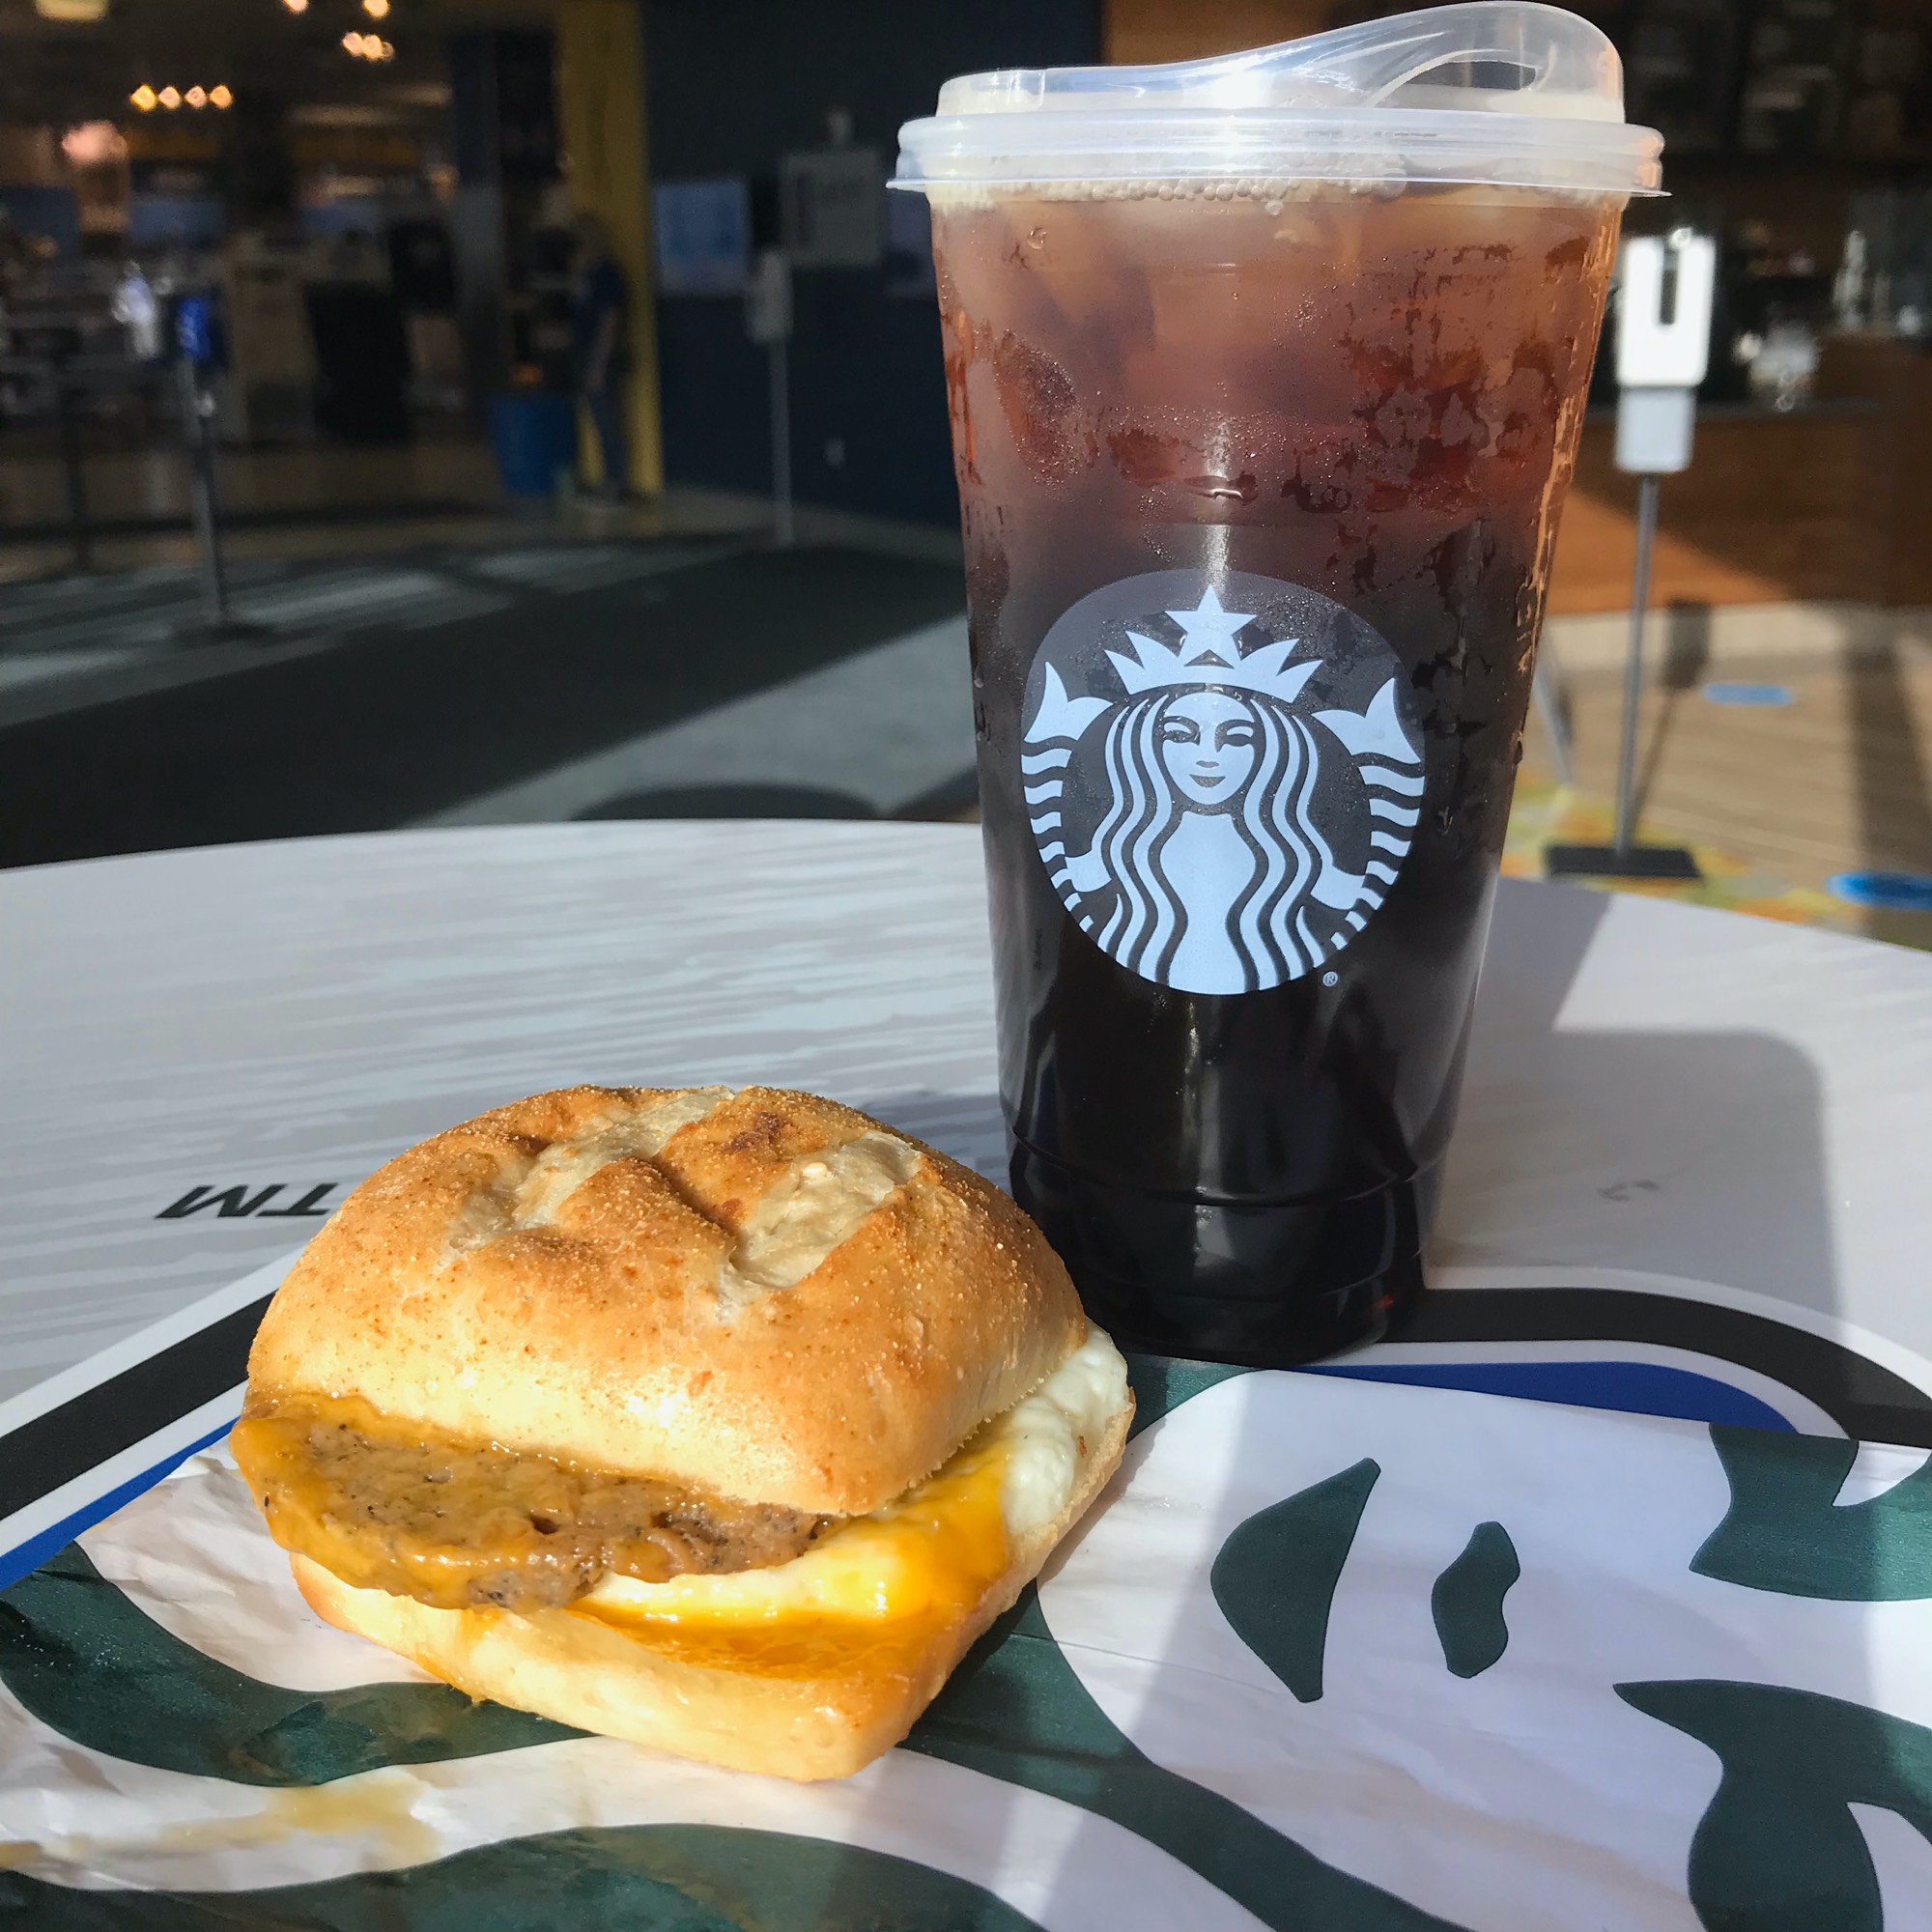 The Impossible Breakfast Sandwich with an iced black coffee.